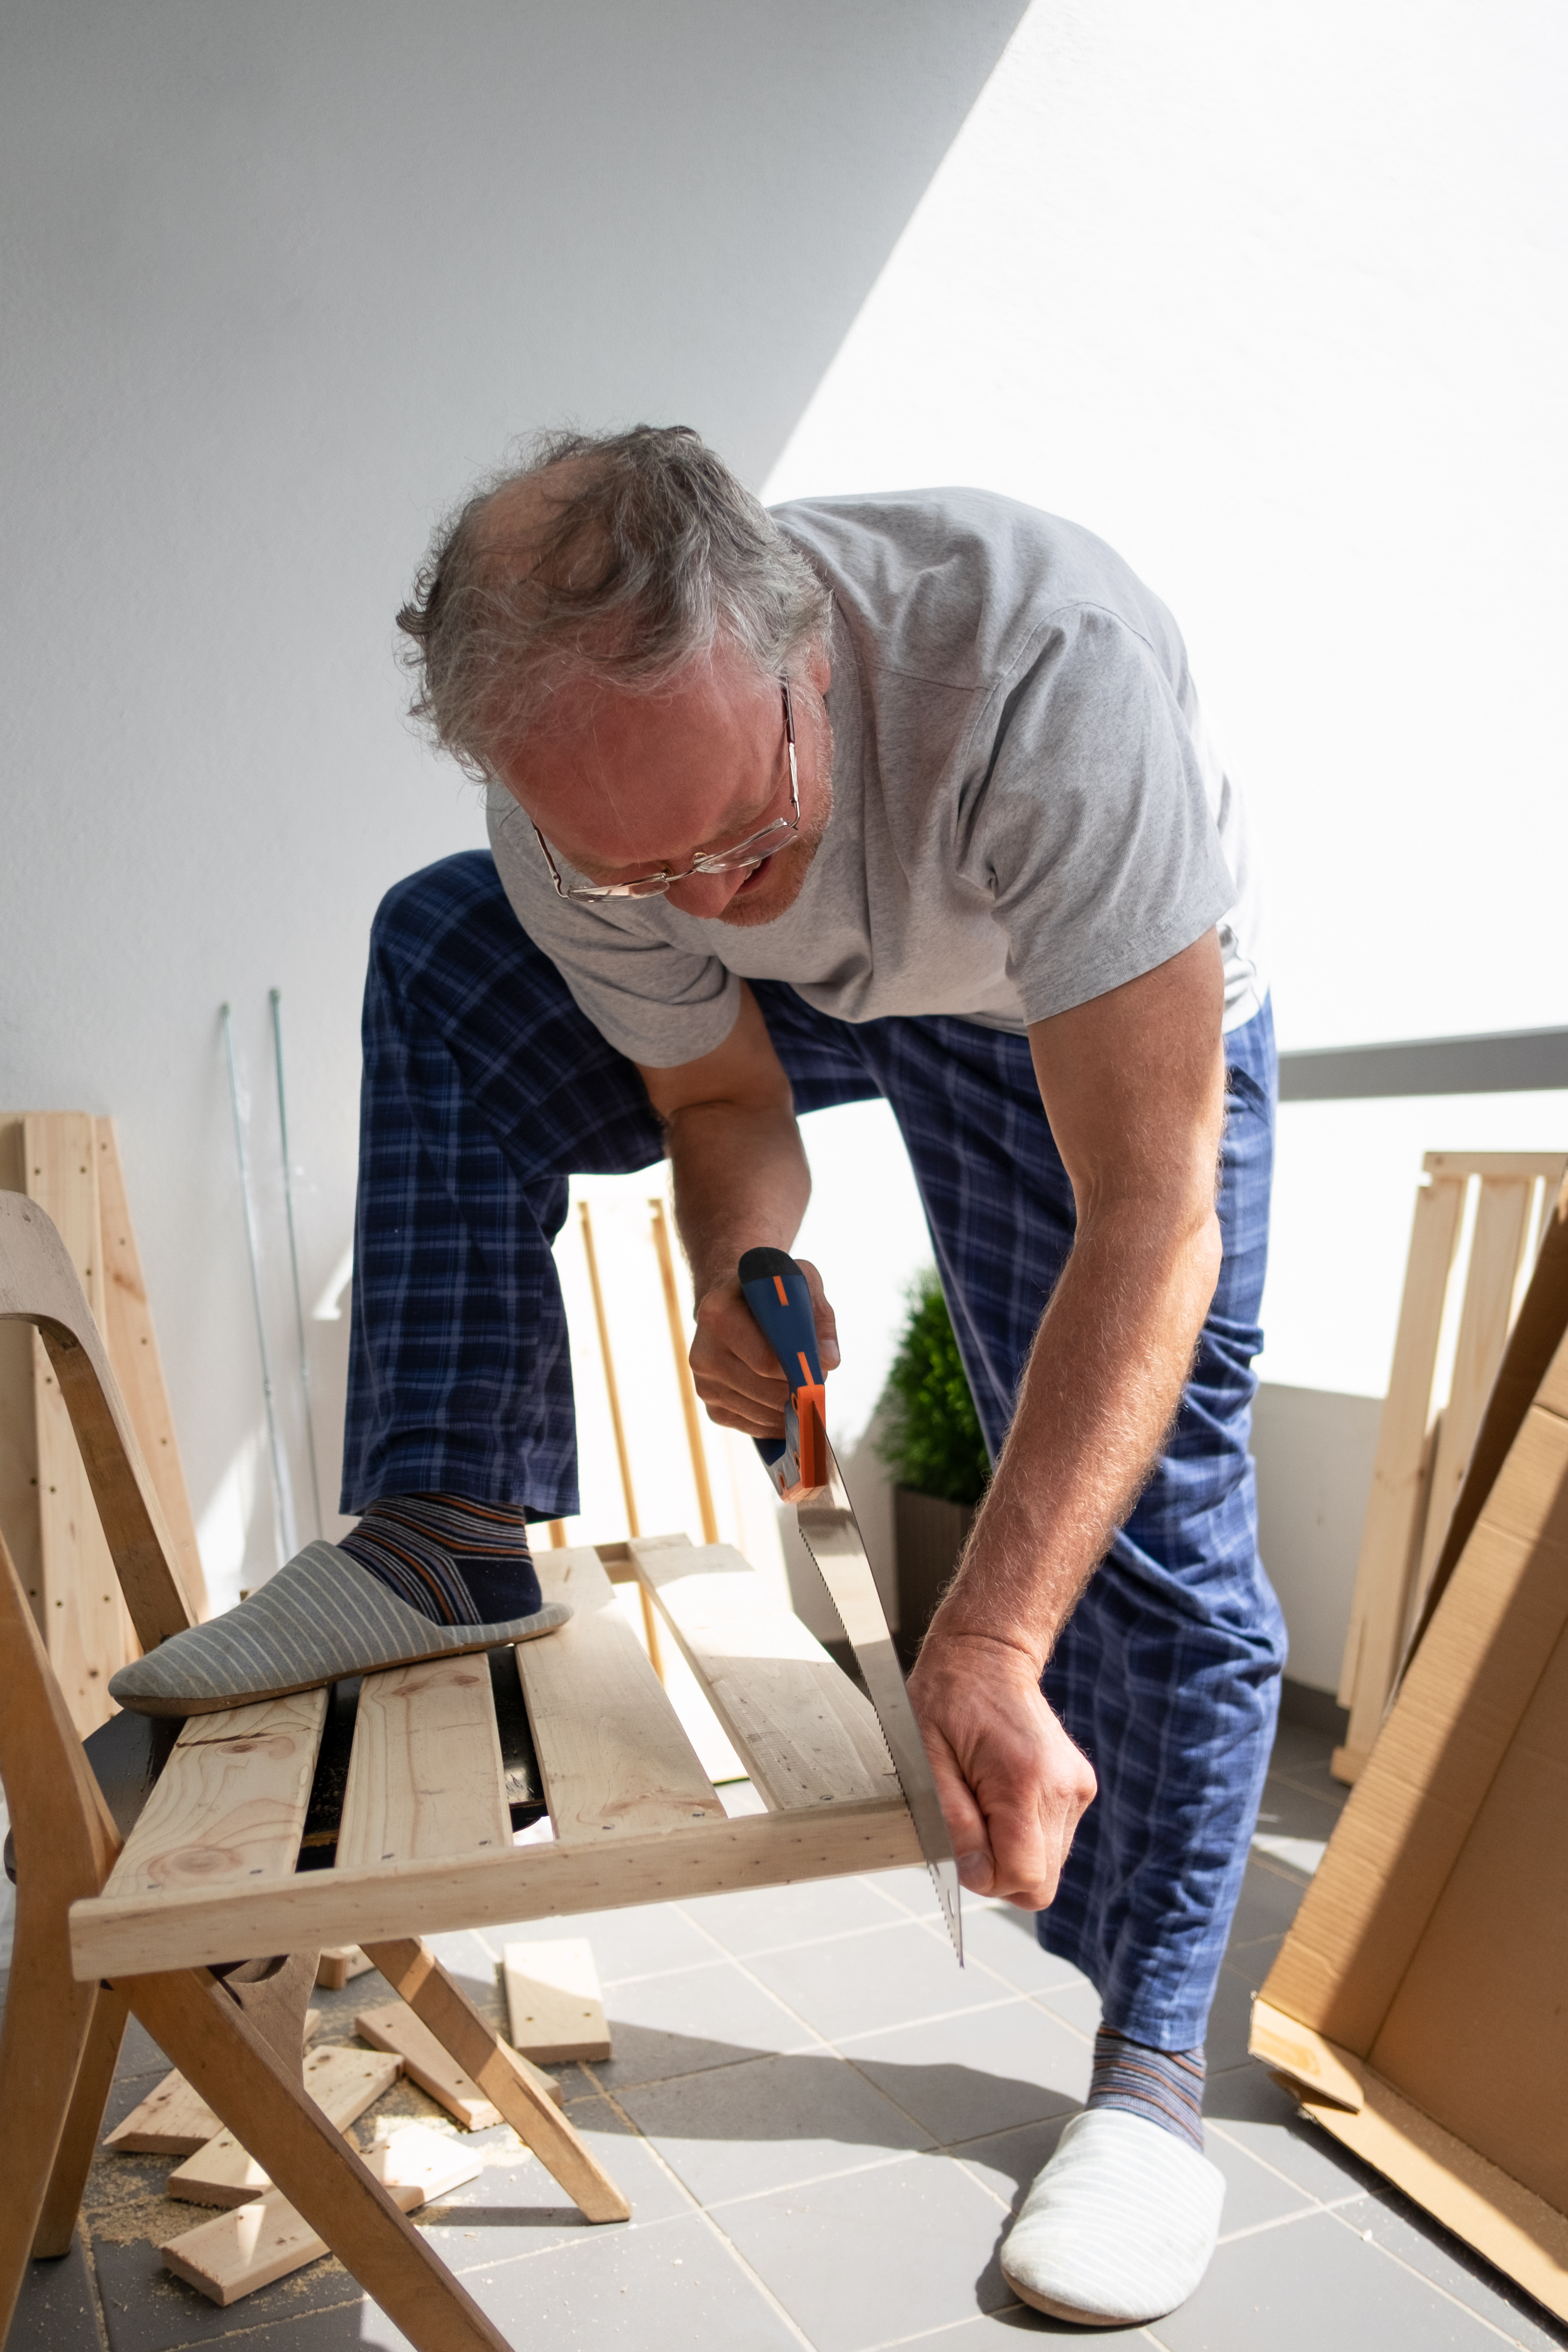 Man assembling wooden furniture with a screwdriver at home